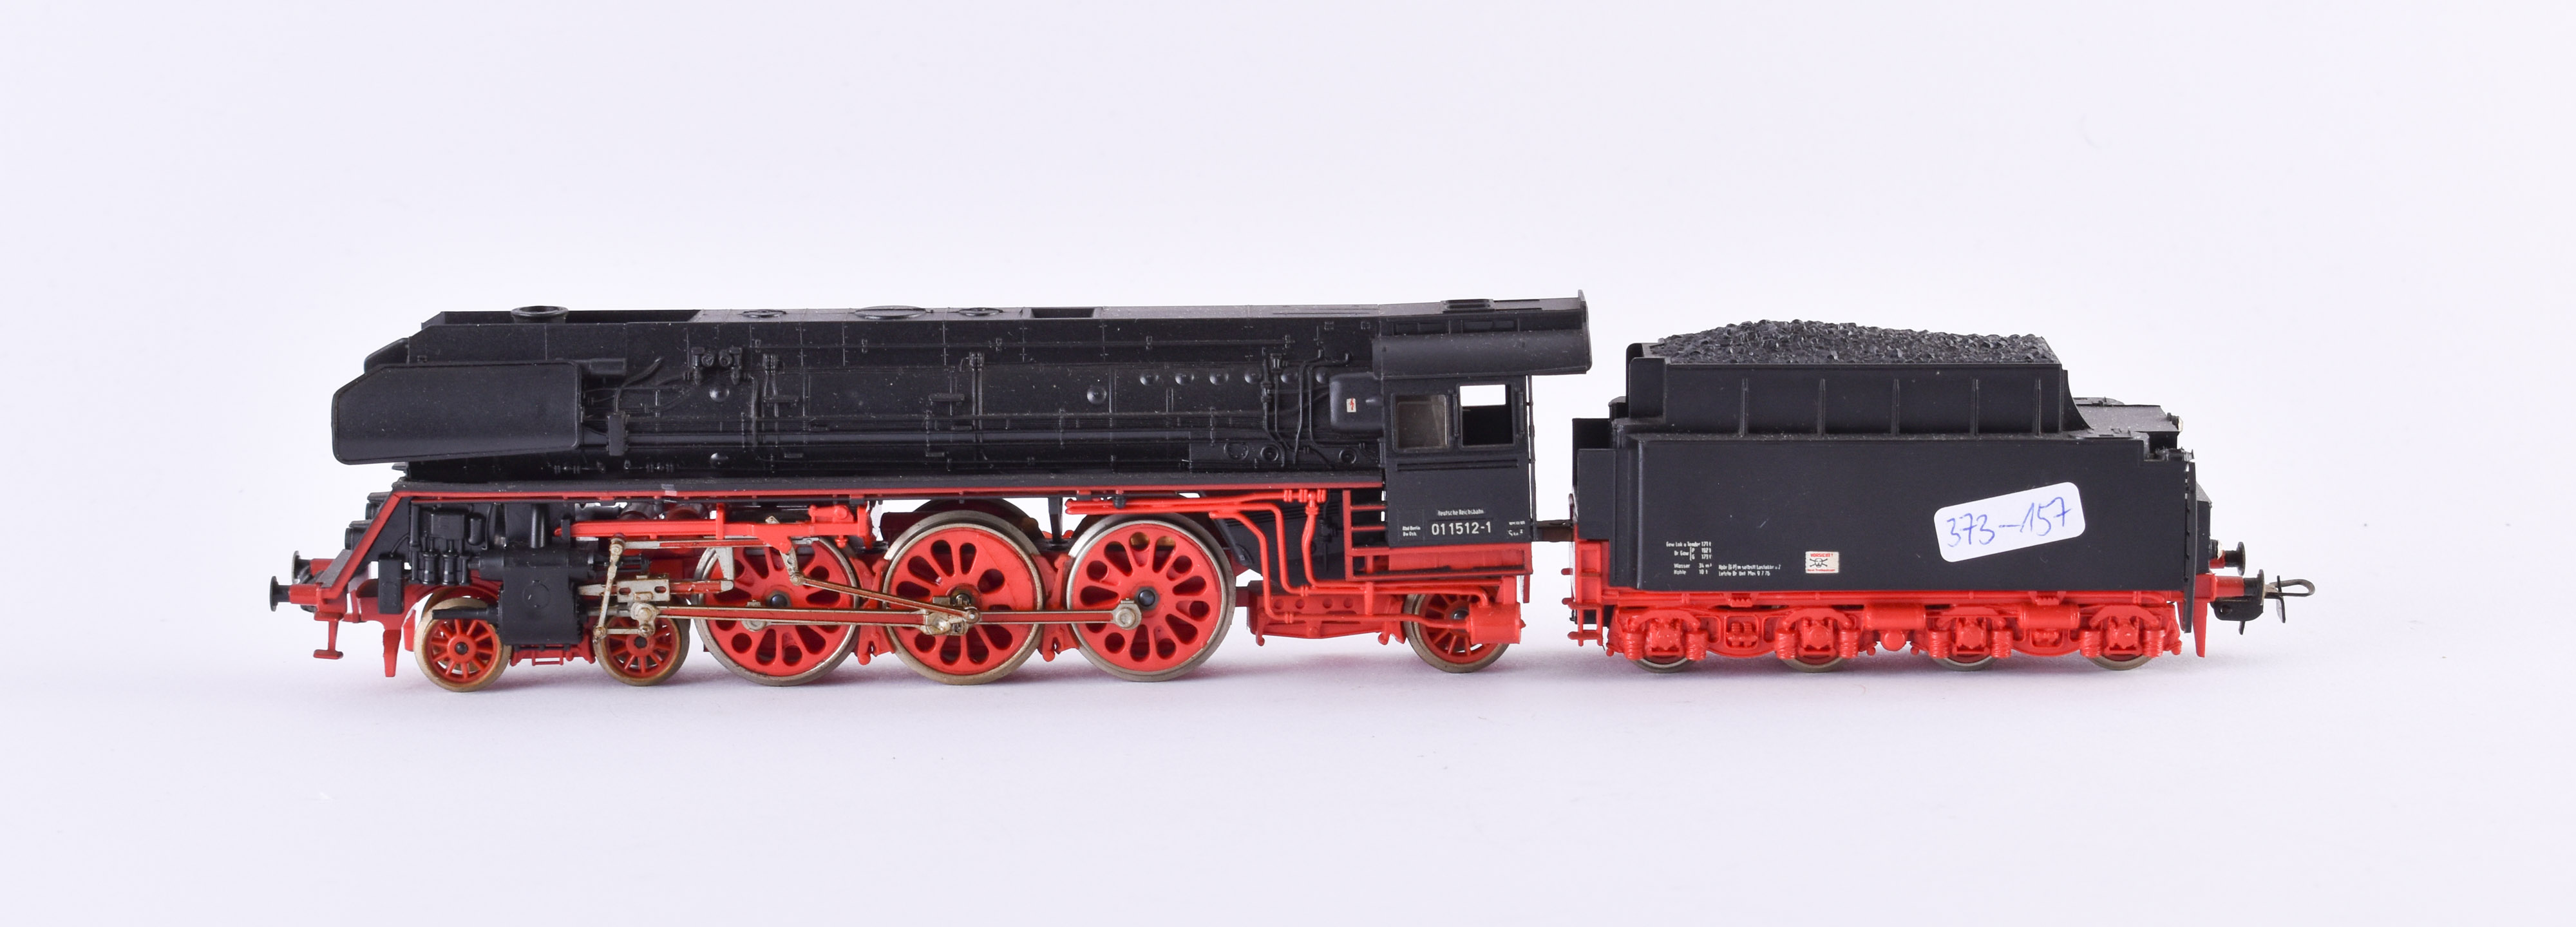 Steam locomotive BR 011512-1 DR - Piko - Image 2 of 2